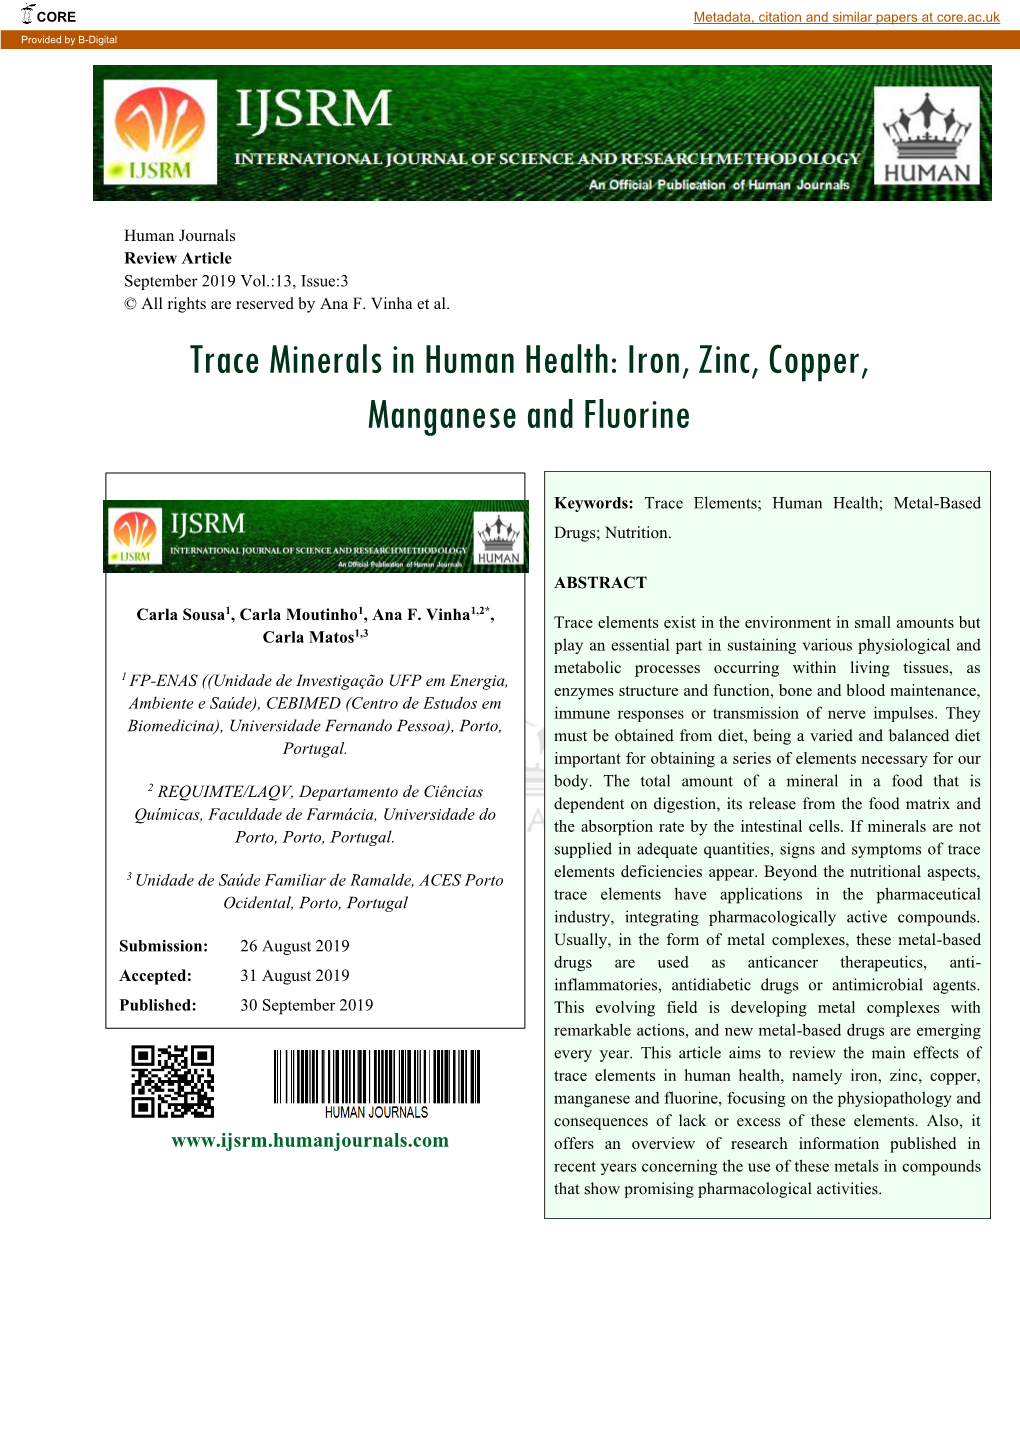 Trace Minerals in Human Health: Iron, Zinc, Copper, Manganese and Fluorine